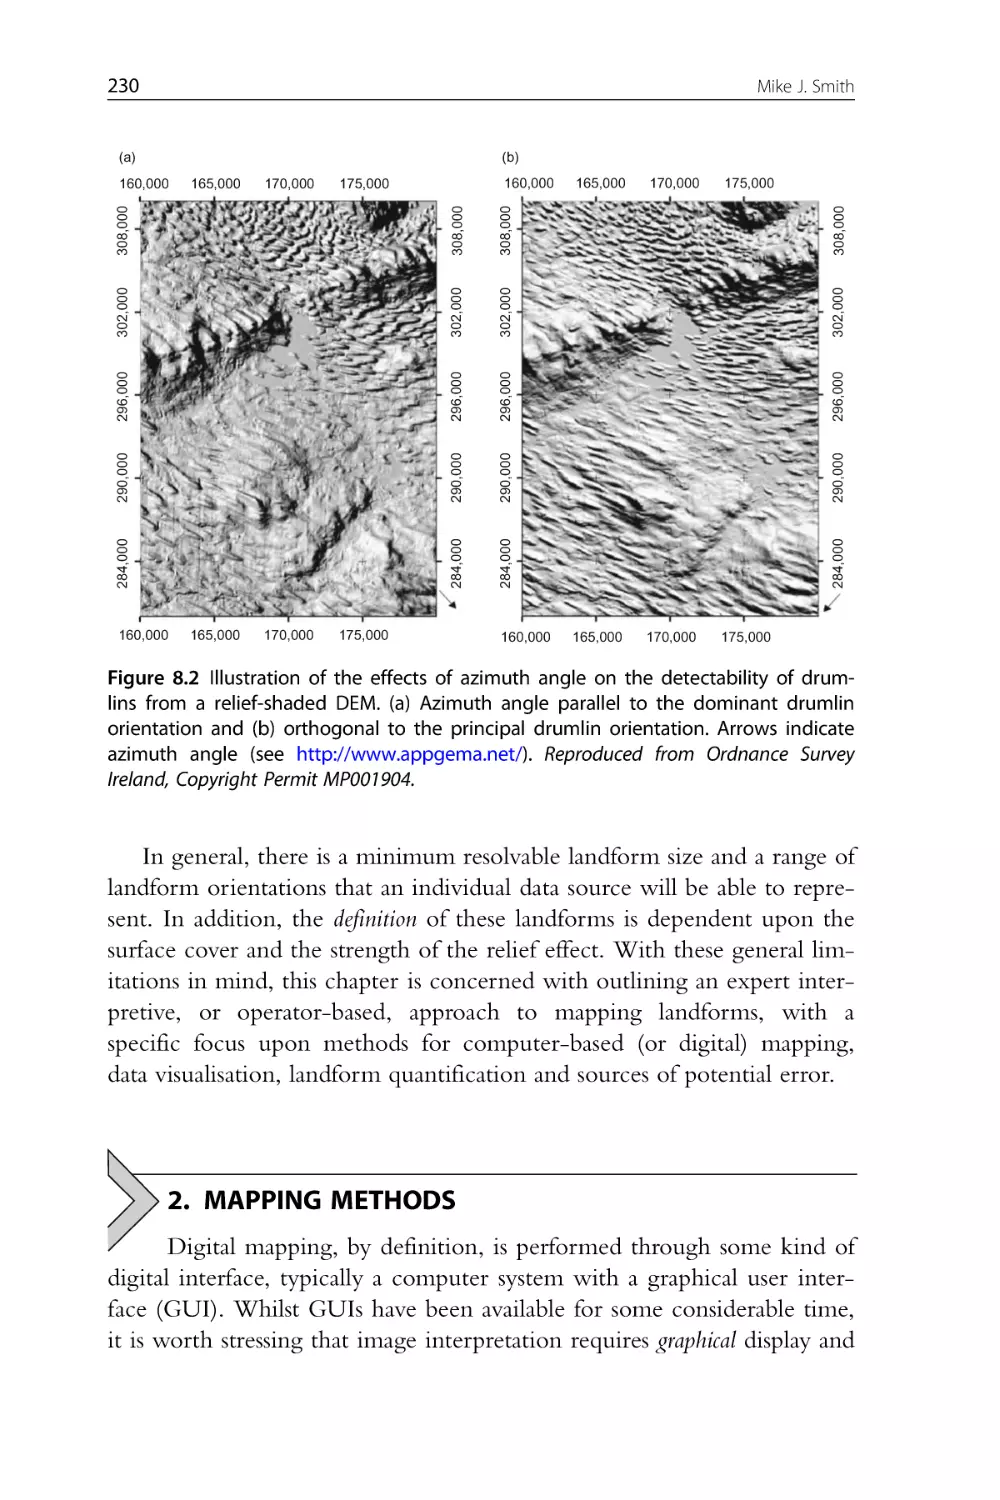 2. Mapping Methods